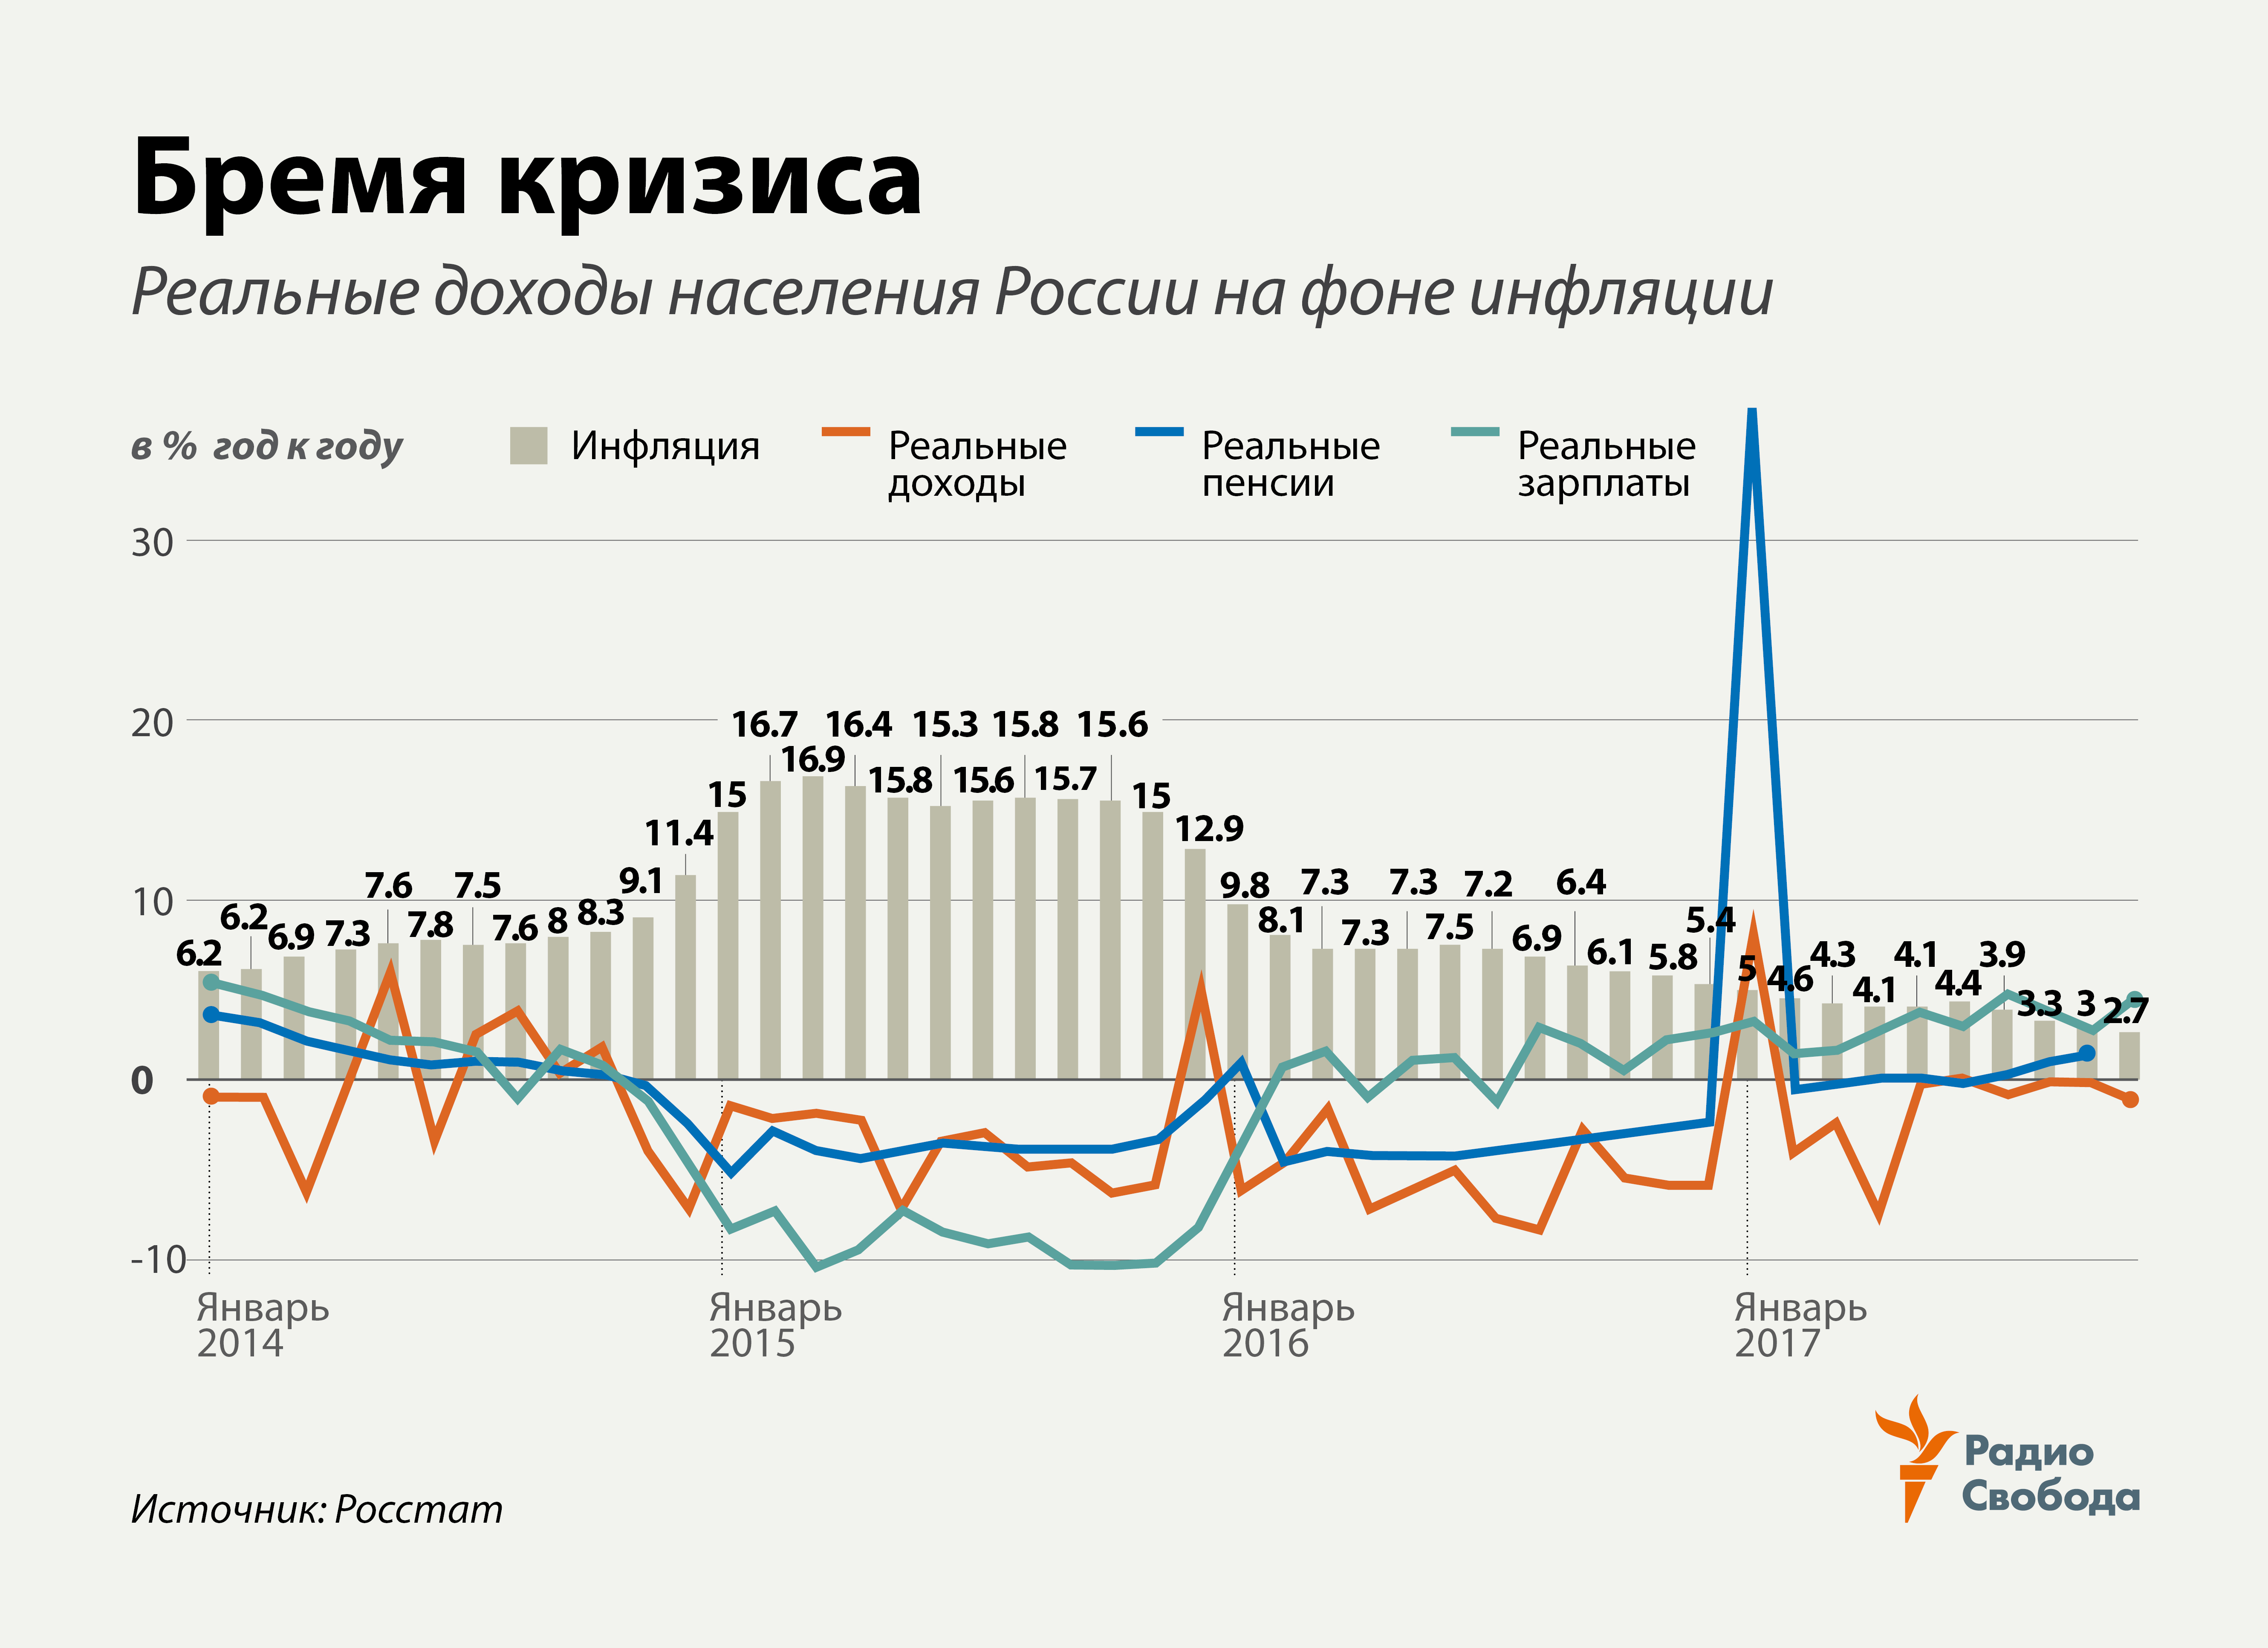 Russia-Factograph-Real Wages, Incomes, Pensions vs Inflation-Nov-17